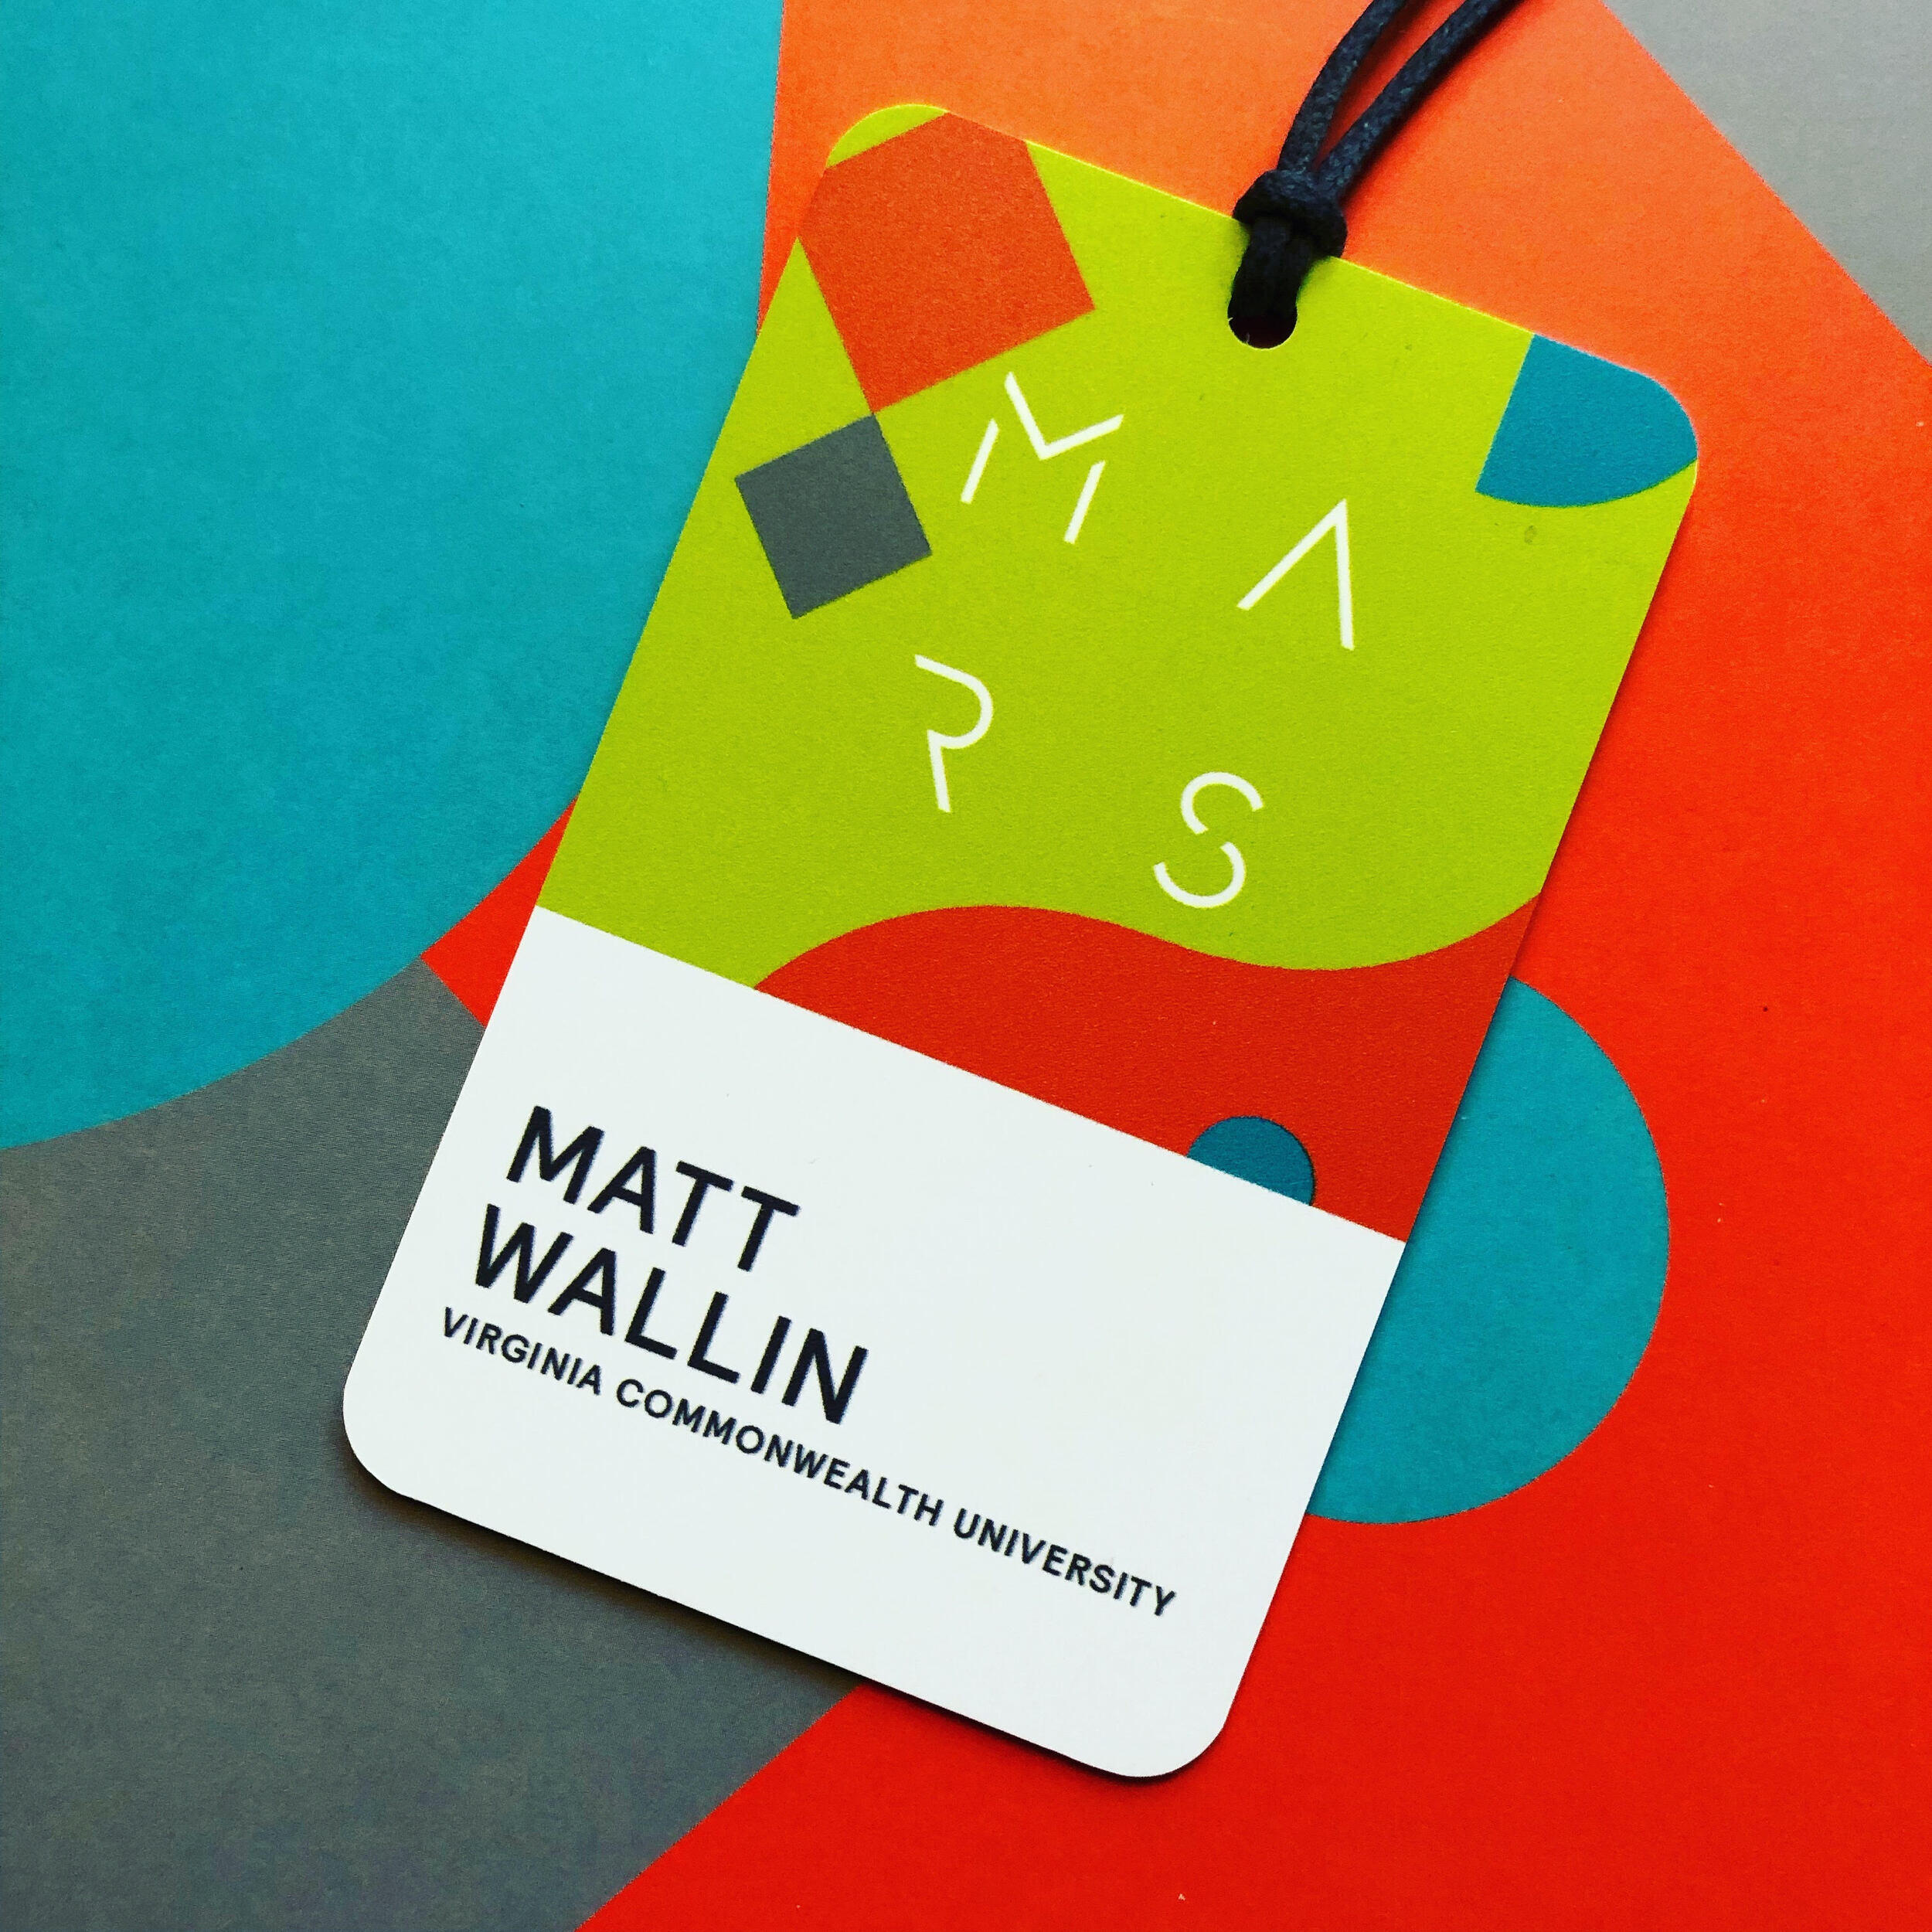 A multi-colored guest pass for the MARS conference with Matt Wallin, Virginia Commonwealth University listed.